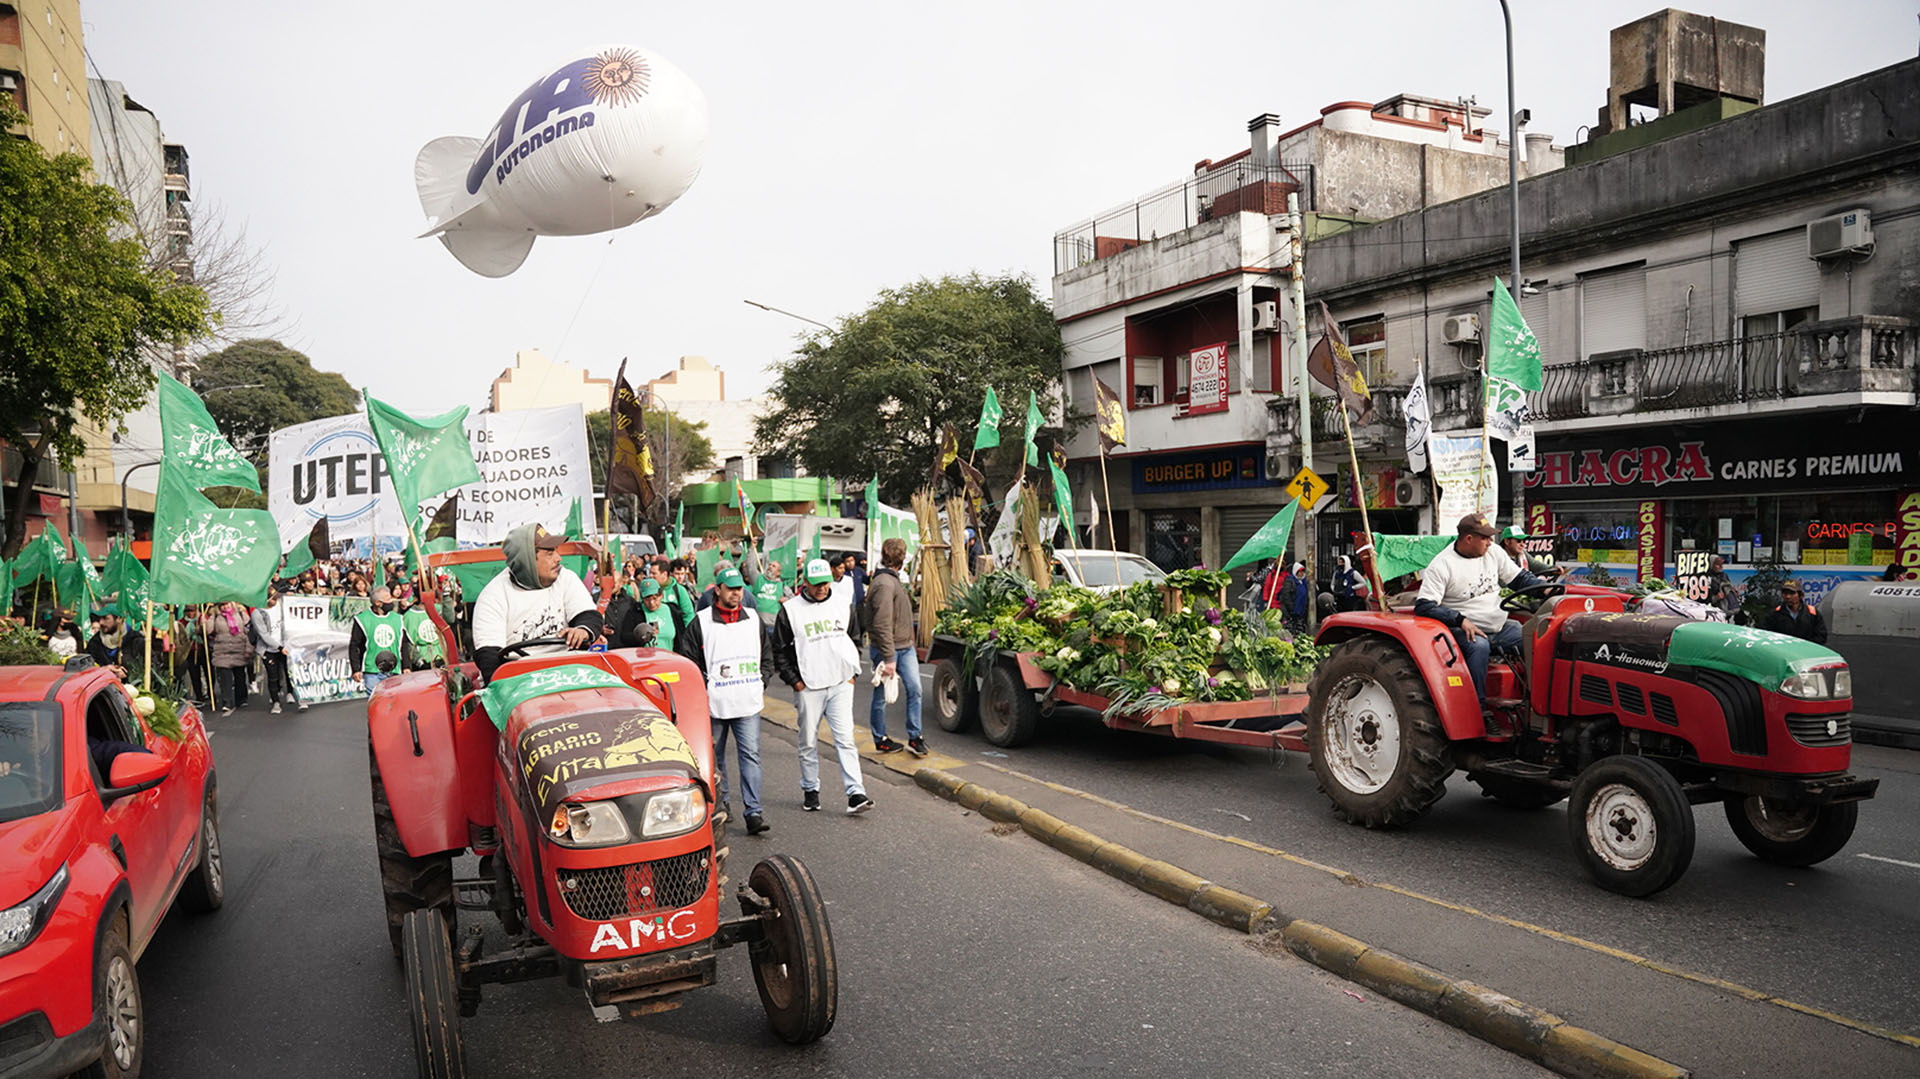 Rural workers also joined the march with their tractors